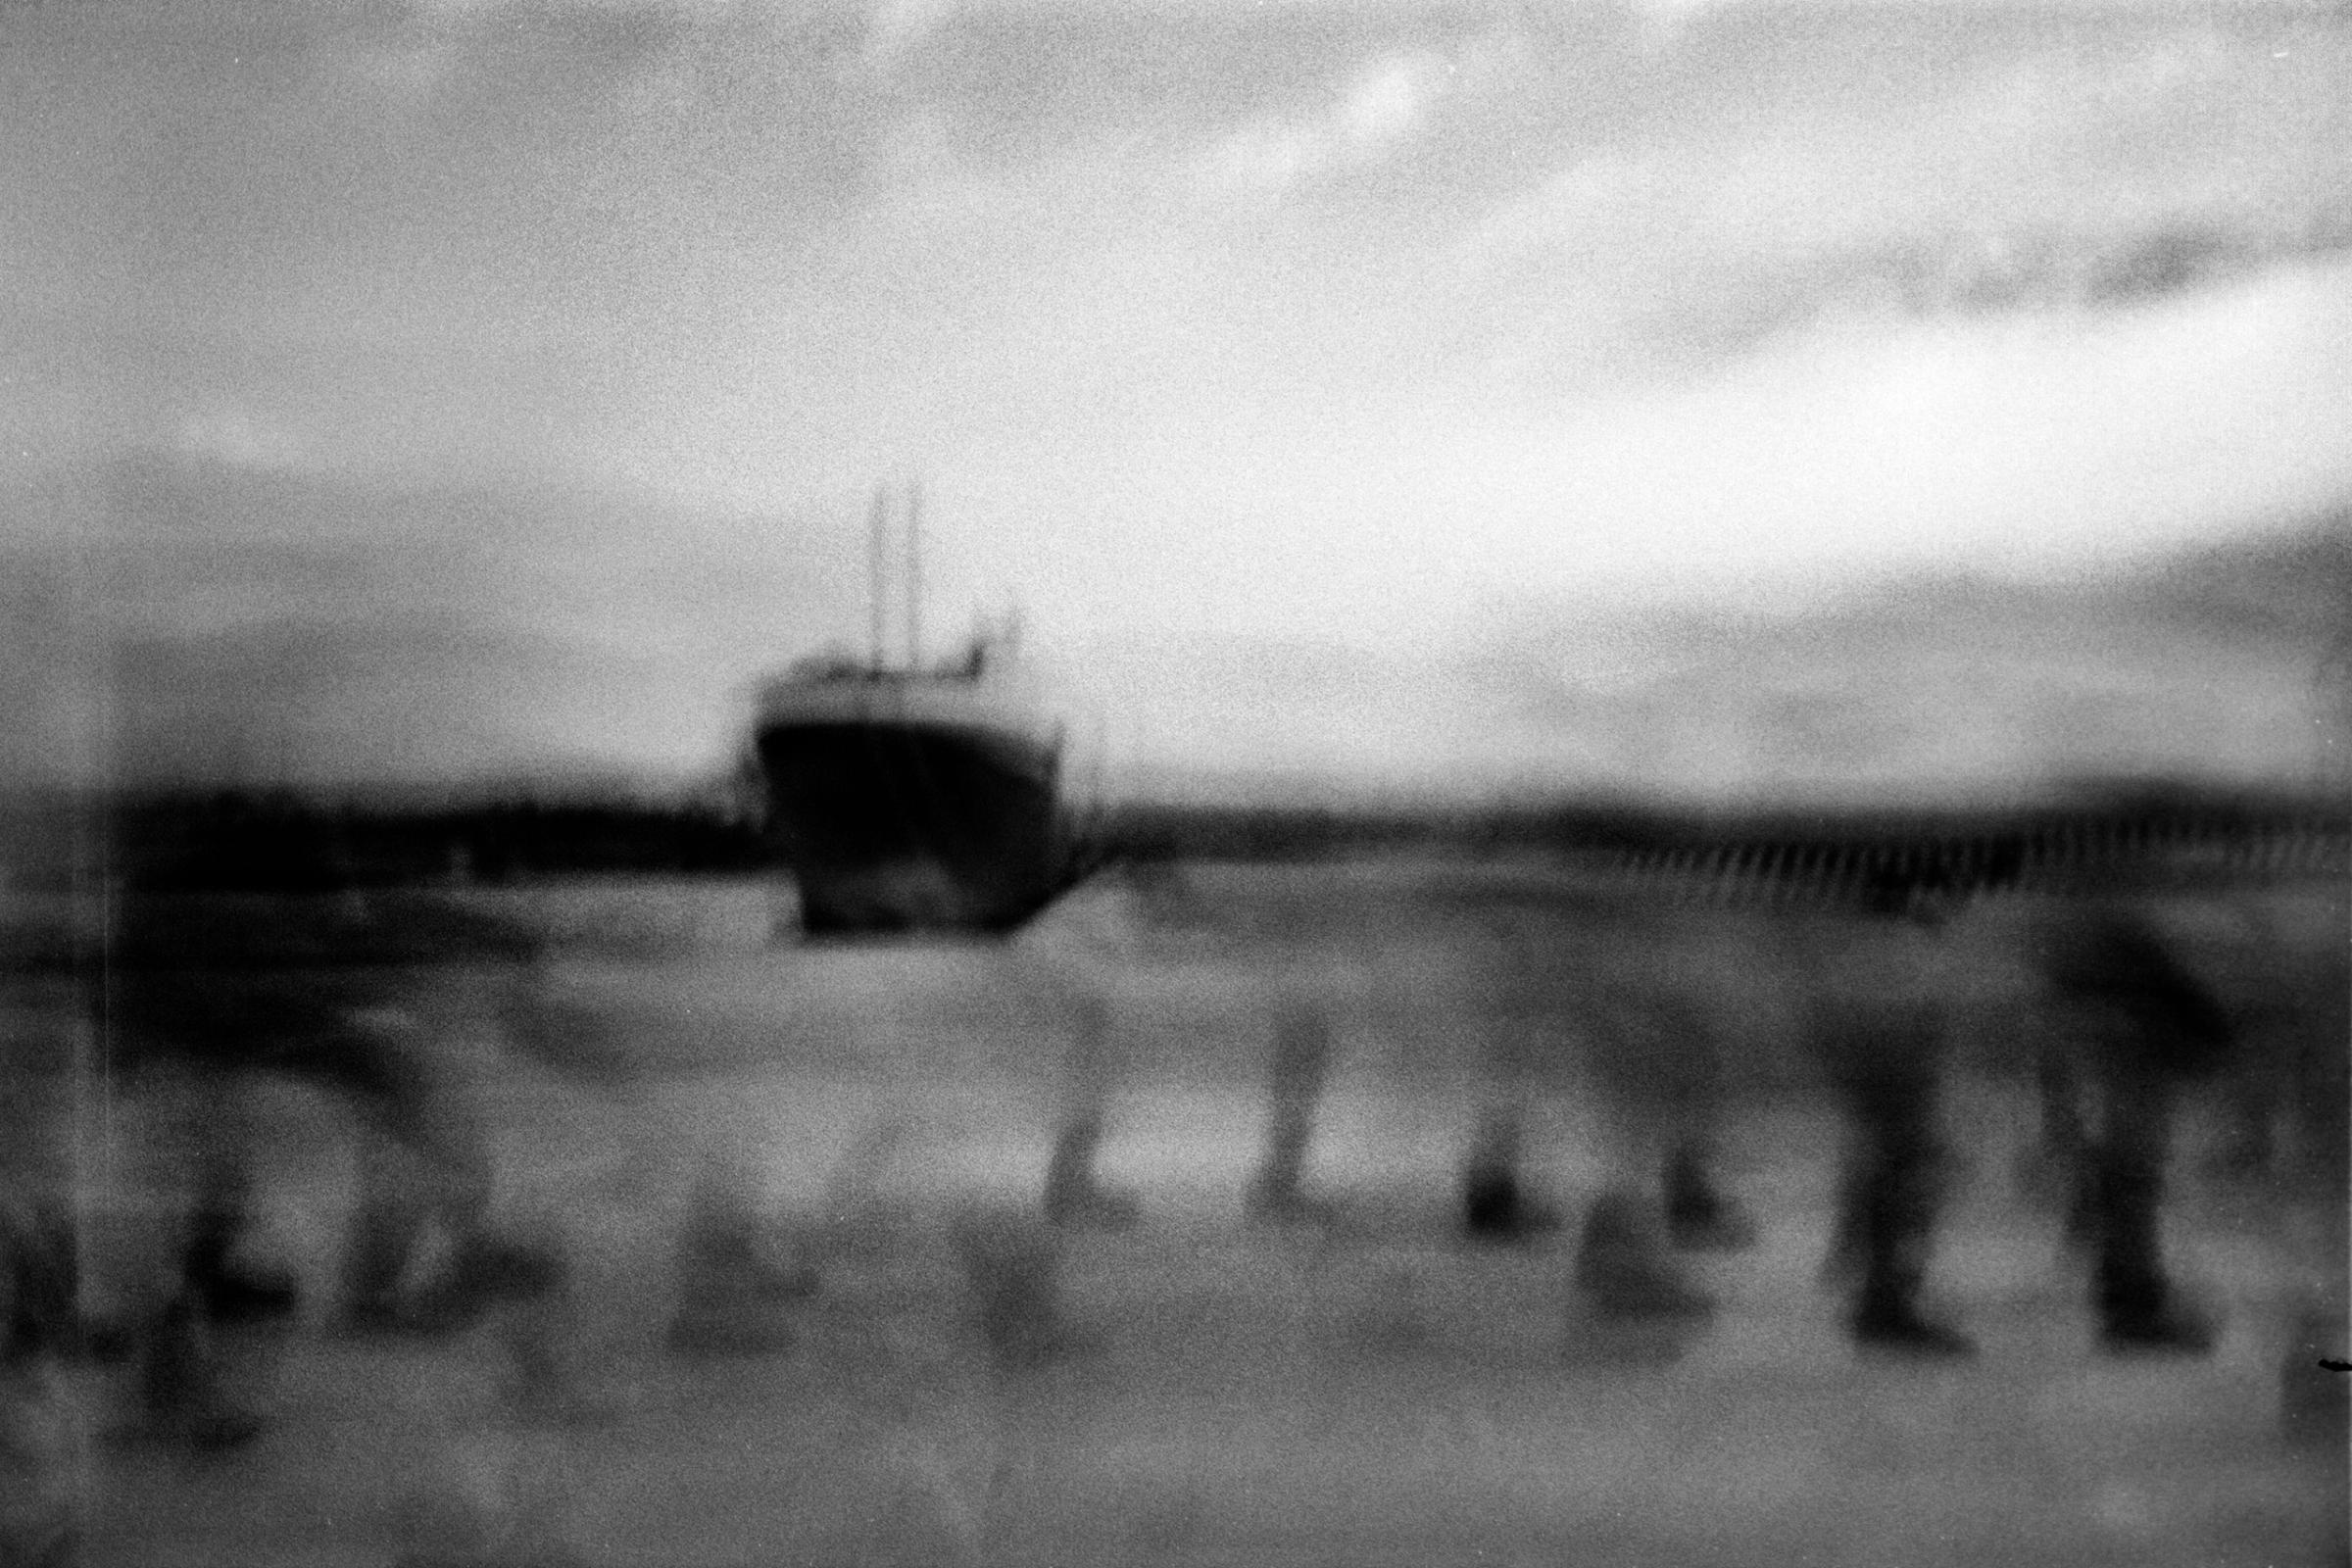 Refugees at the port in Augusta, Italy after arriving, June 20, 2015. This photo was taken with the pinhole camera 'Pinolina' .